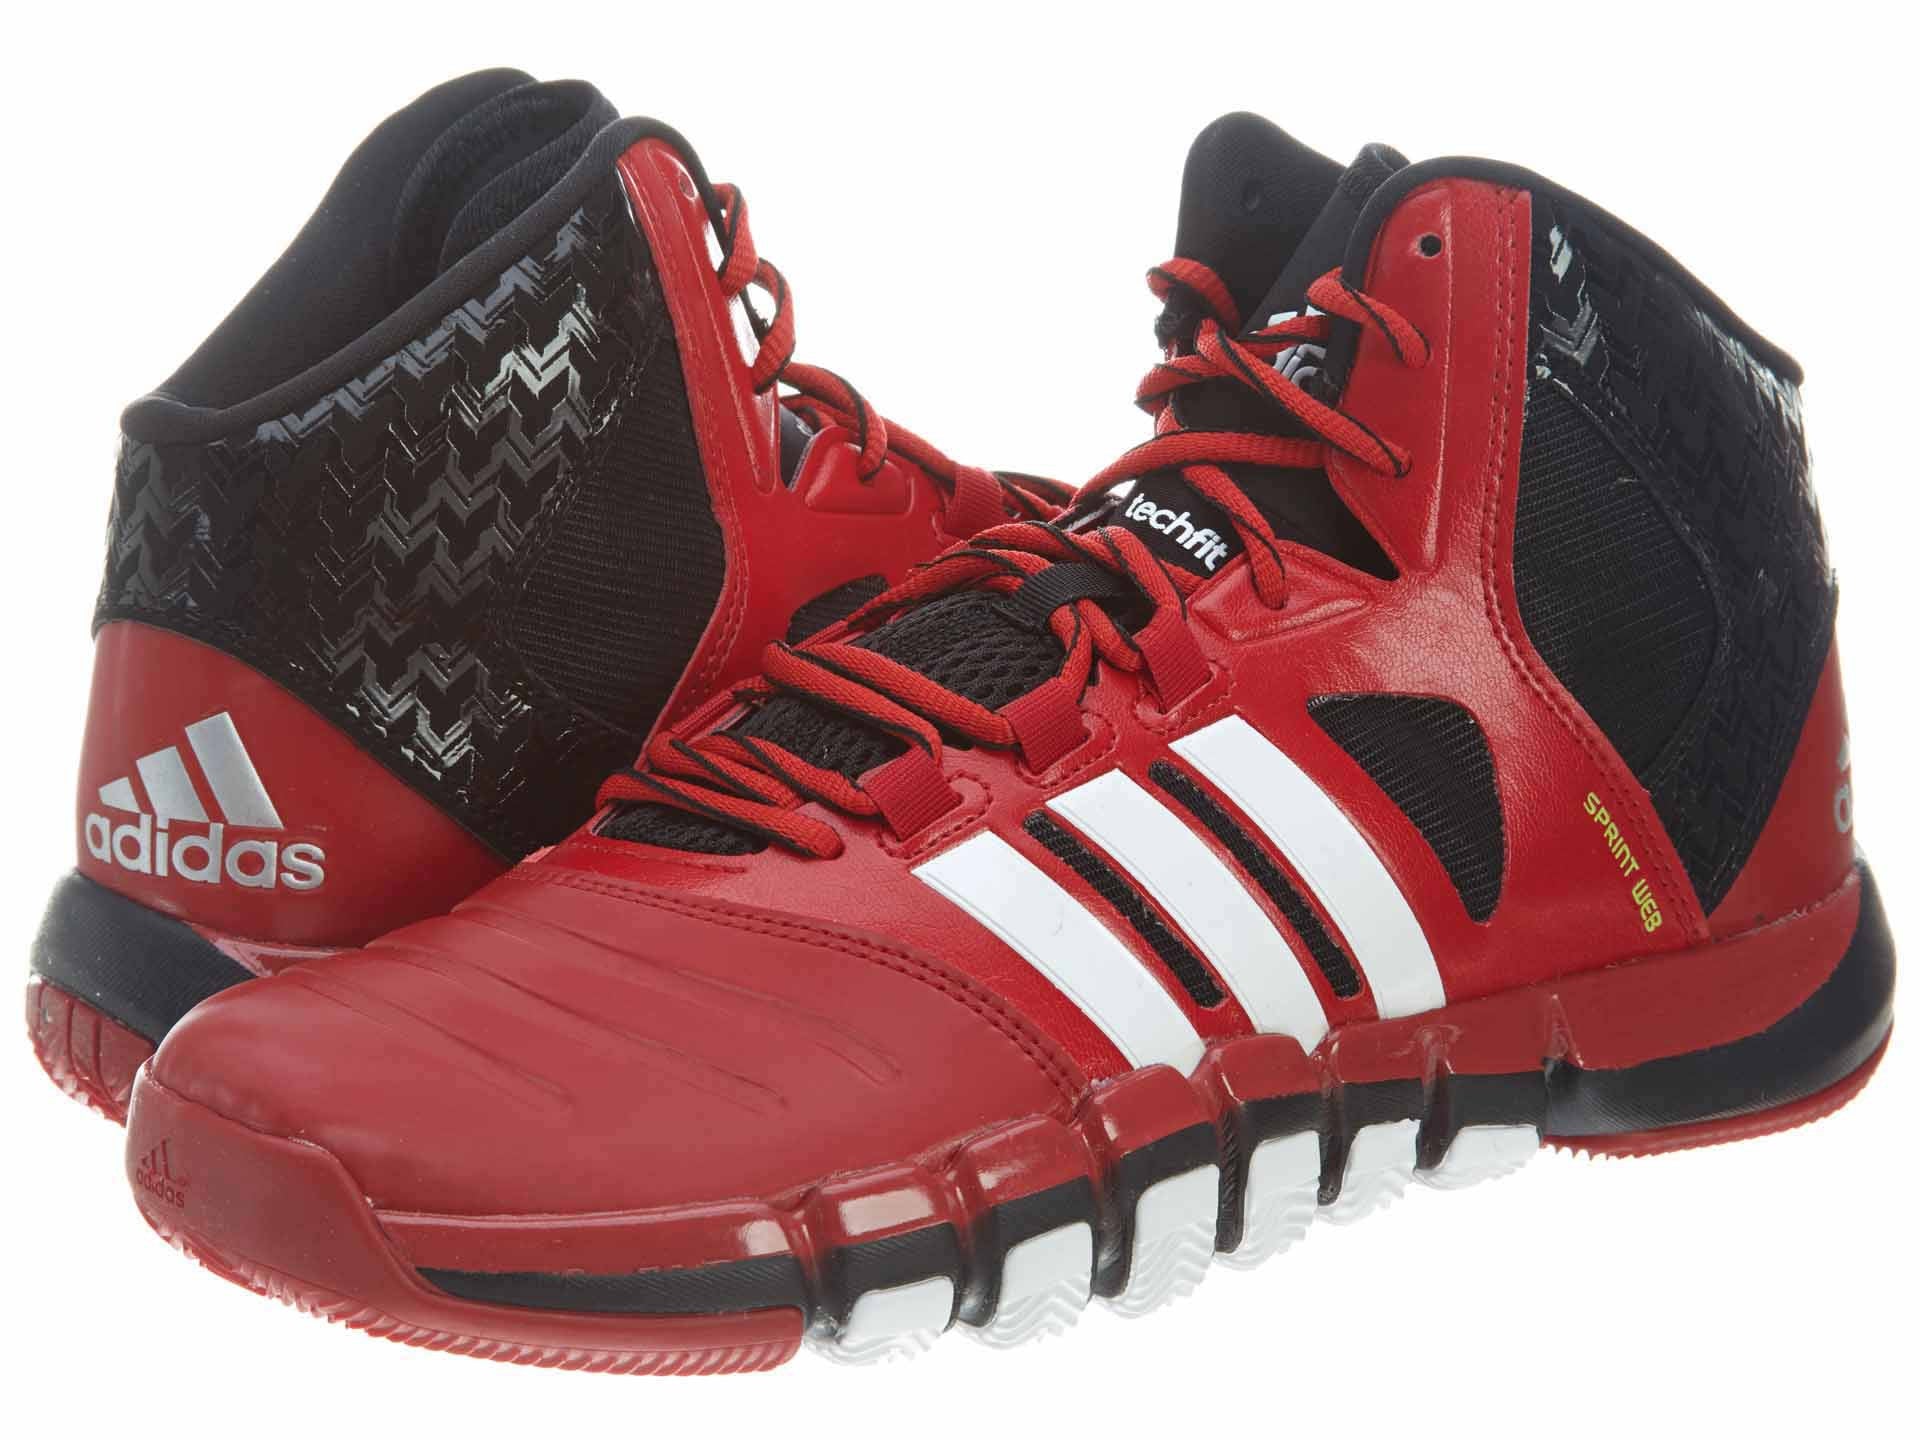 adidas crazy ghost basketball shoes